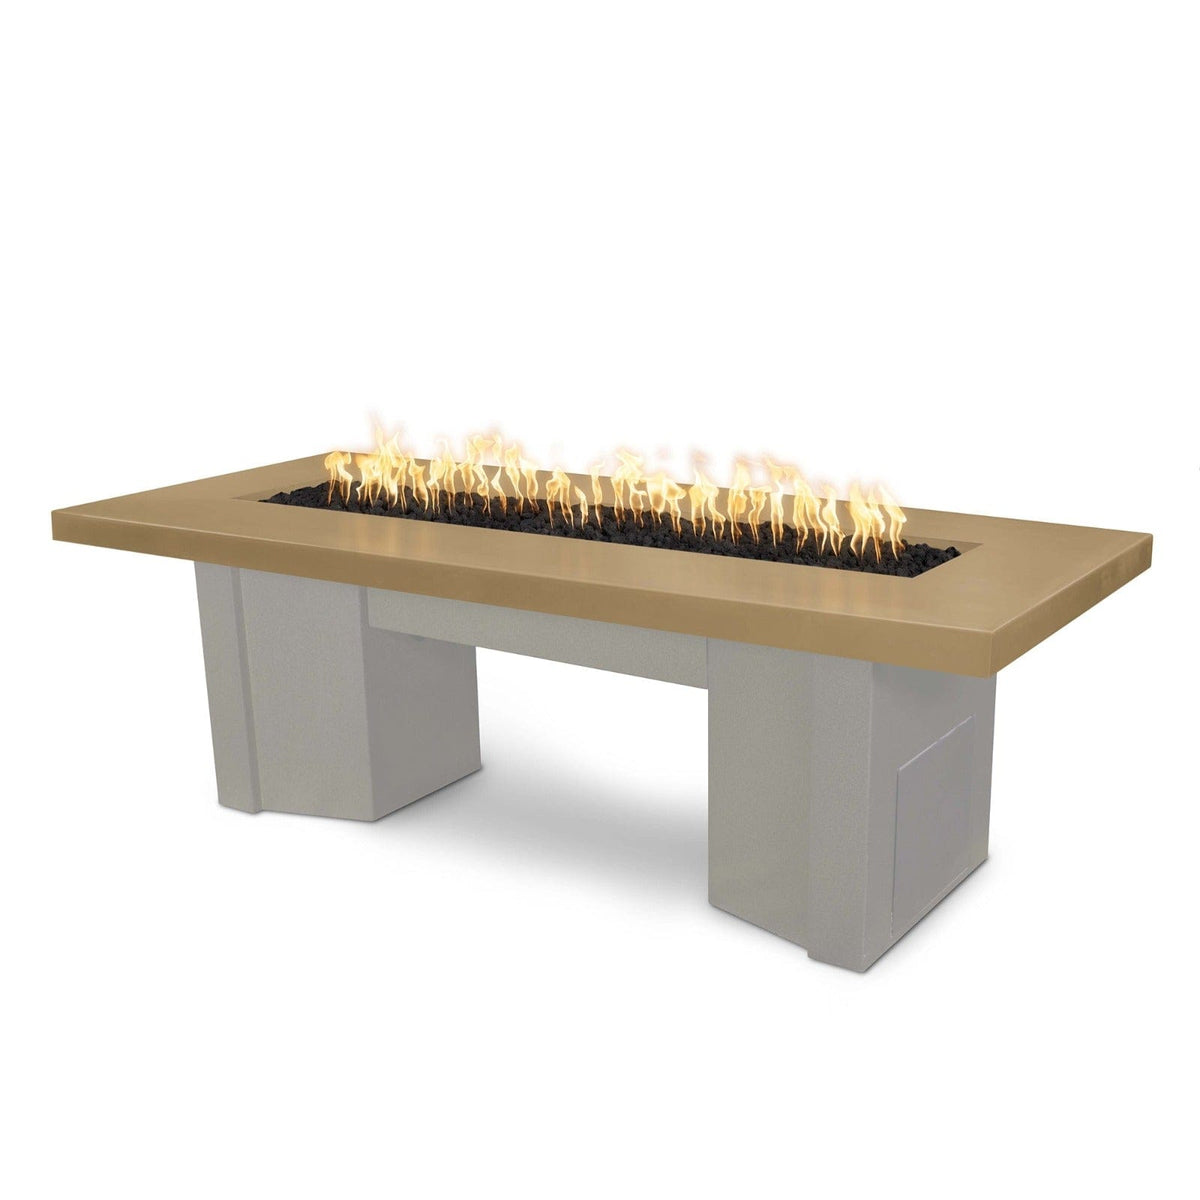 The Outdoor Plus Fire Features Brown (-BRN) / Pewter Powder Coated Steel (-PEW) The Outdoor Plus 60&quot; Alameda Fire Table Smooth Concrete in Liquid Propane - Flame Sense System with Push Button Spark Igniter / OPT-ALMGFRC60FSEN-LP